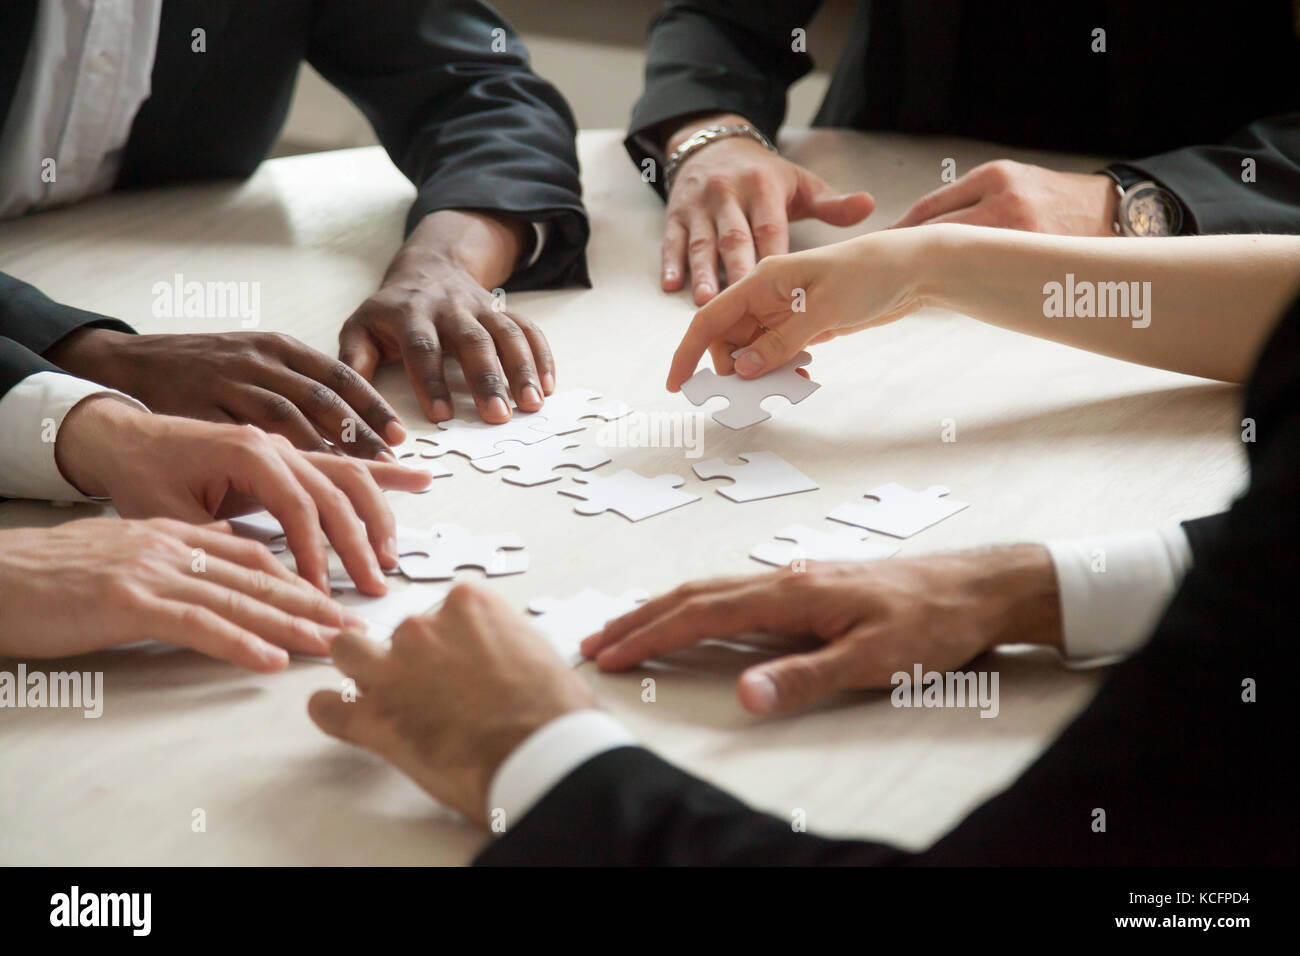 Close up of multiethnic team solving blank puzzle on table. Female hand offering puzzle piece, problem solution concept. Multi-racial executive employ Stock Photo